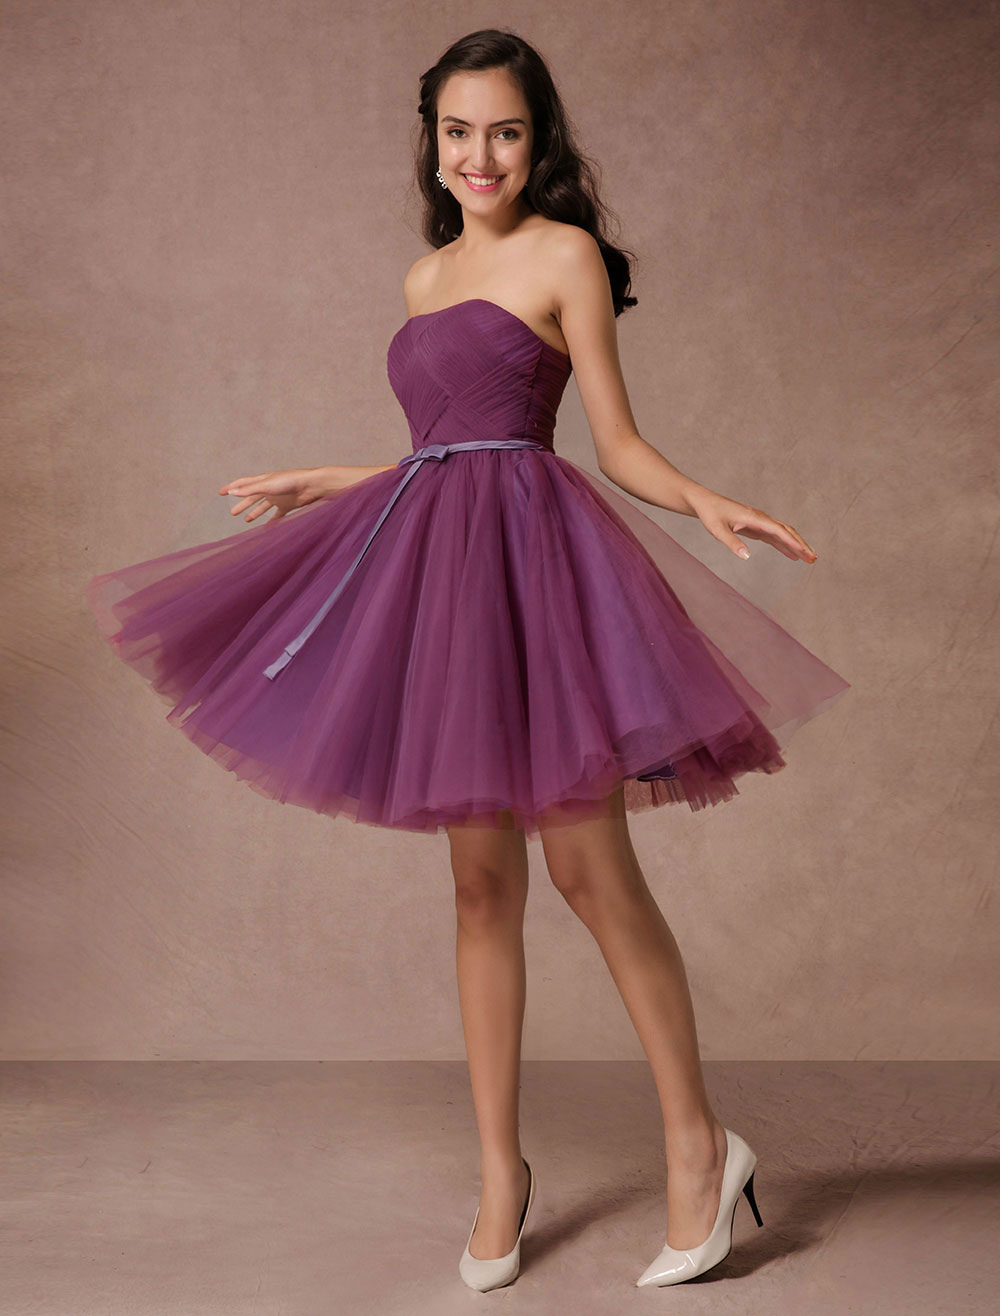 Short Bridesmaid Dress Plum Tulle Strapless Homecoming Dress Short Prom Dress Backless Woven Cocktail Dress With Sash (Wedding) photo